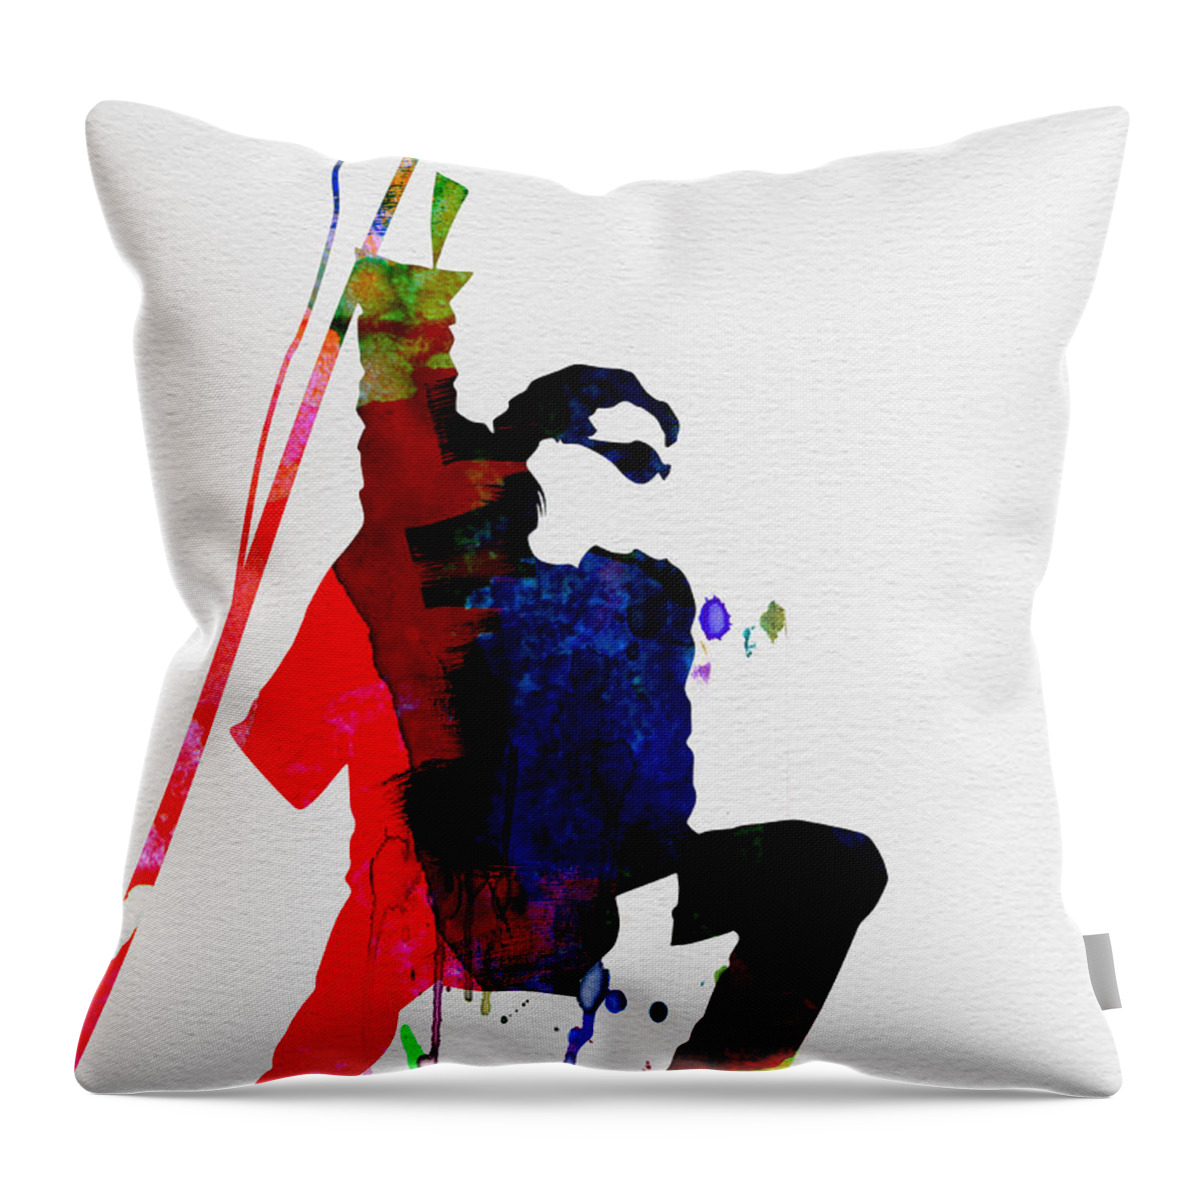 Bono Throw Pillow featuring the painting Bono Watercolor by Naxart Studio